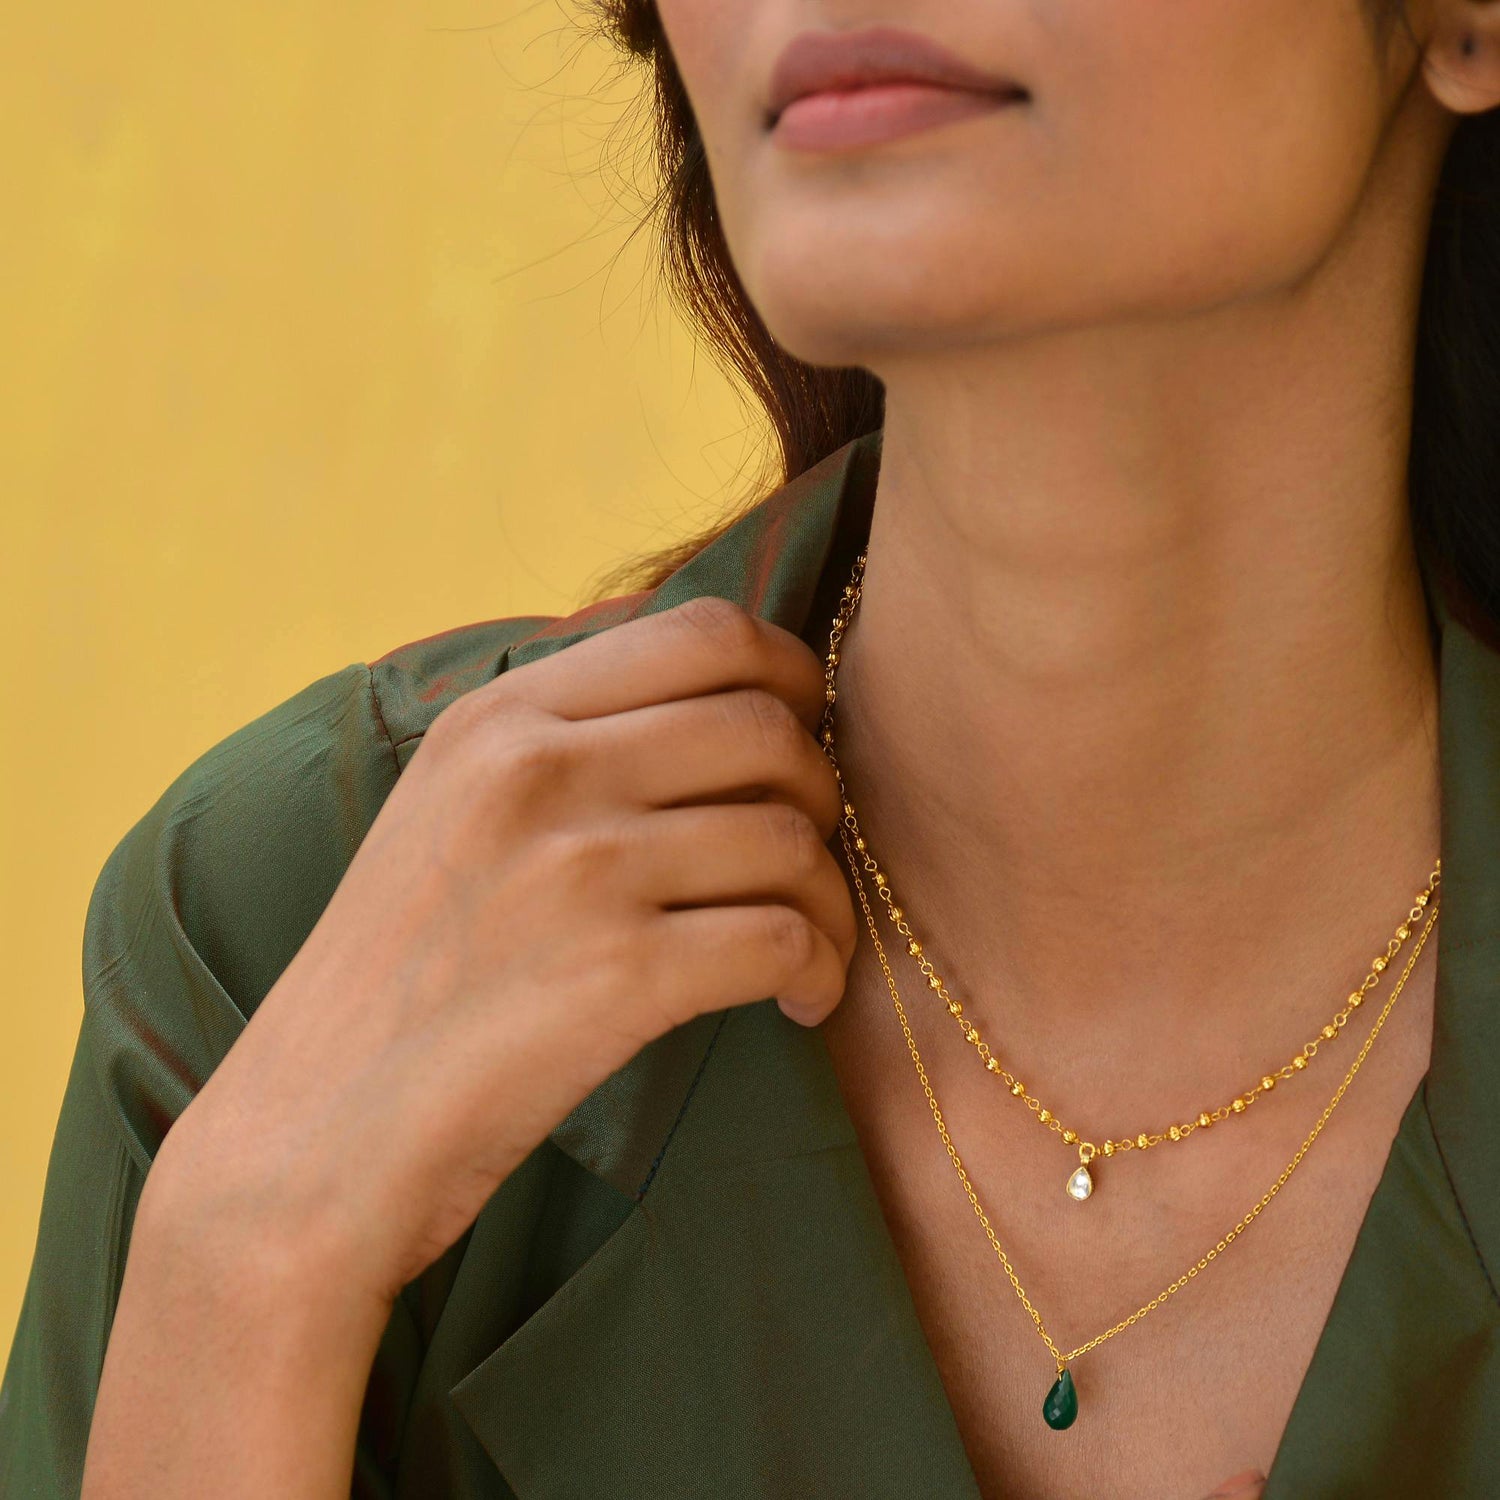 woman wearing gold and emerald necklaces 